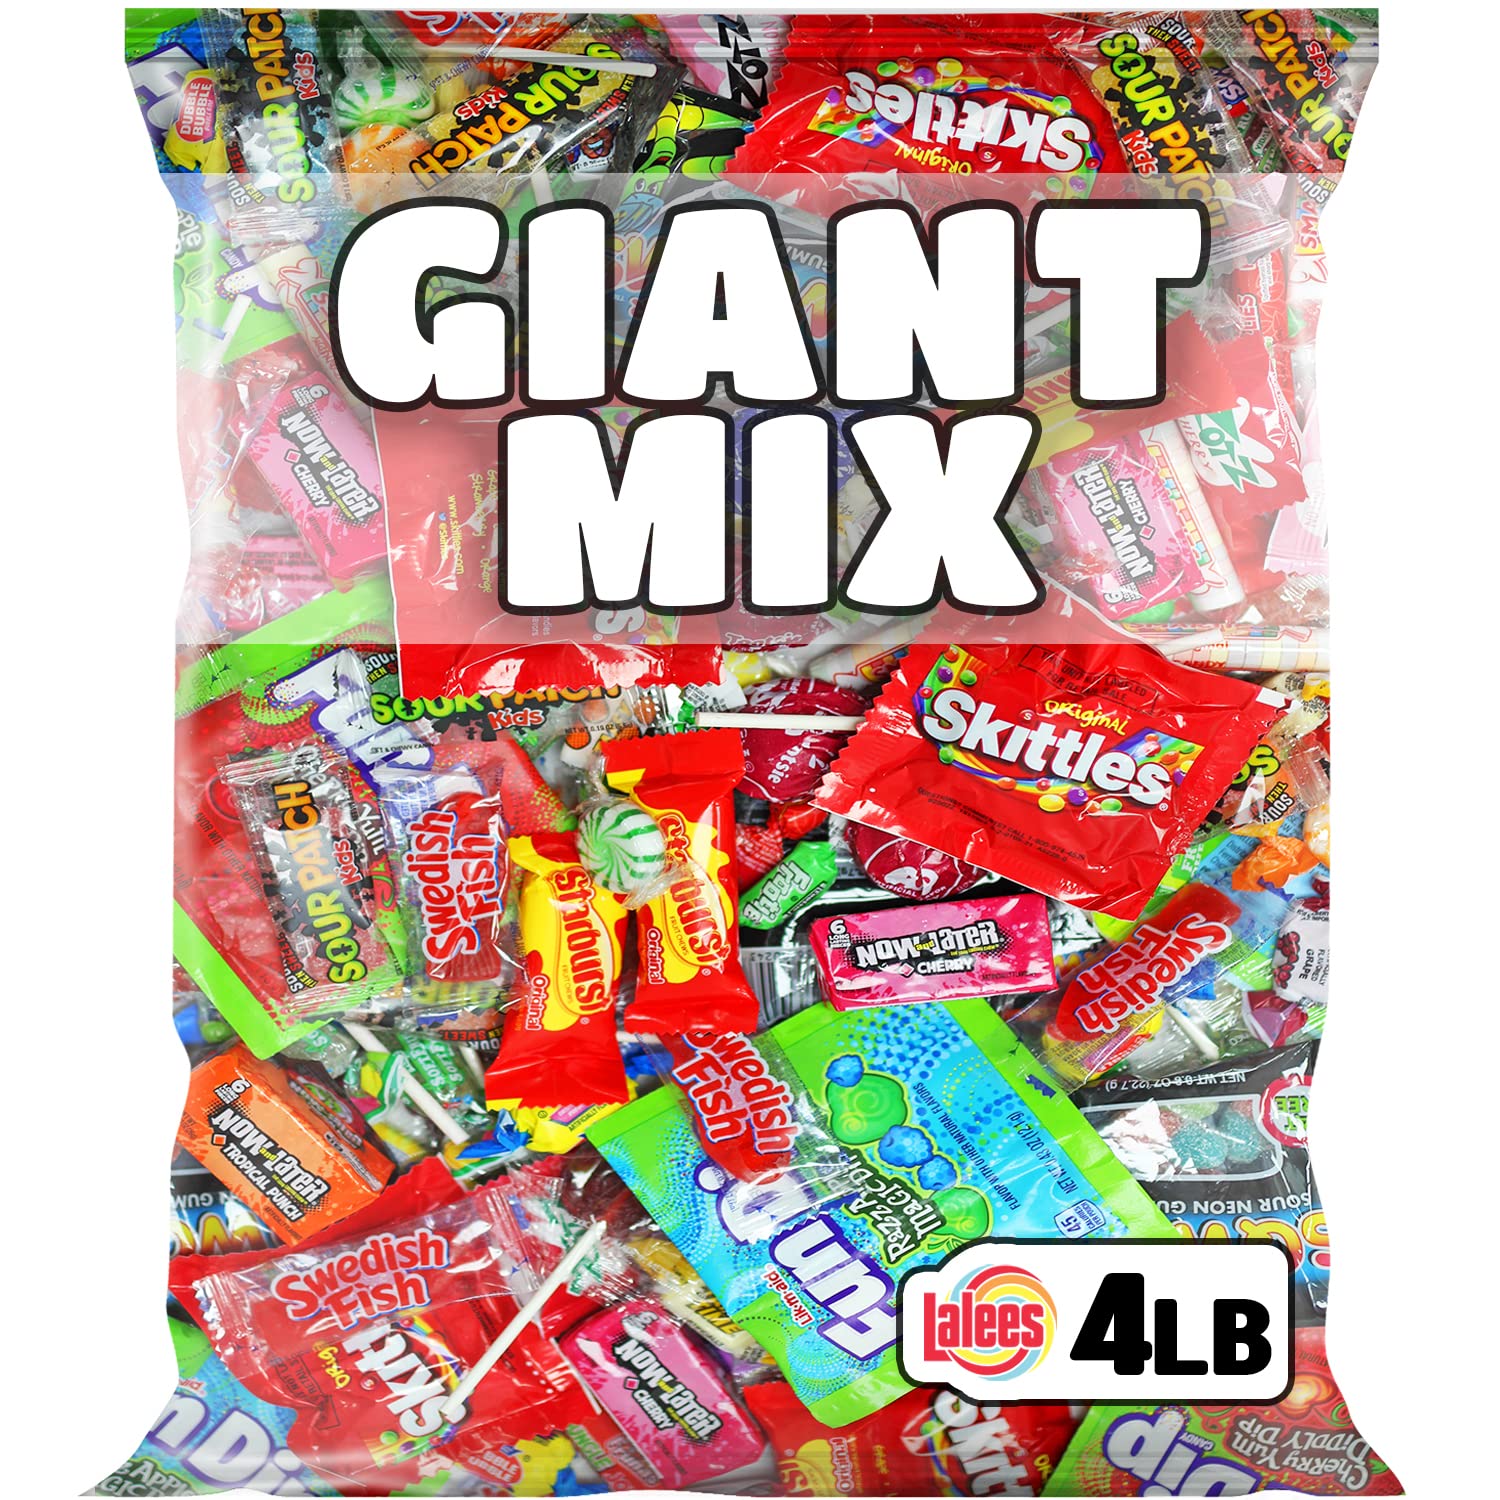 Sour Candy Variety Pack - 2 Pounds - Bulk Candy - Individually Wrapped Candy  - Assorted Pinata Candy - Candy For Goodie Bags - Party Favors For Kids 2  Pound (Pack of 1) 